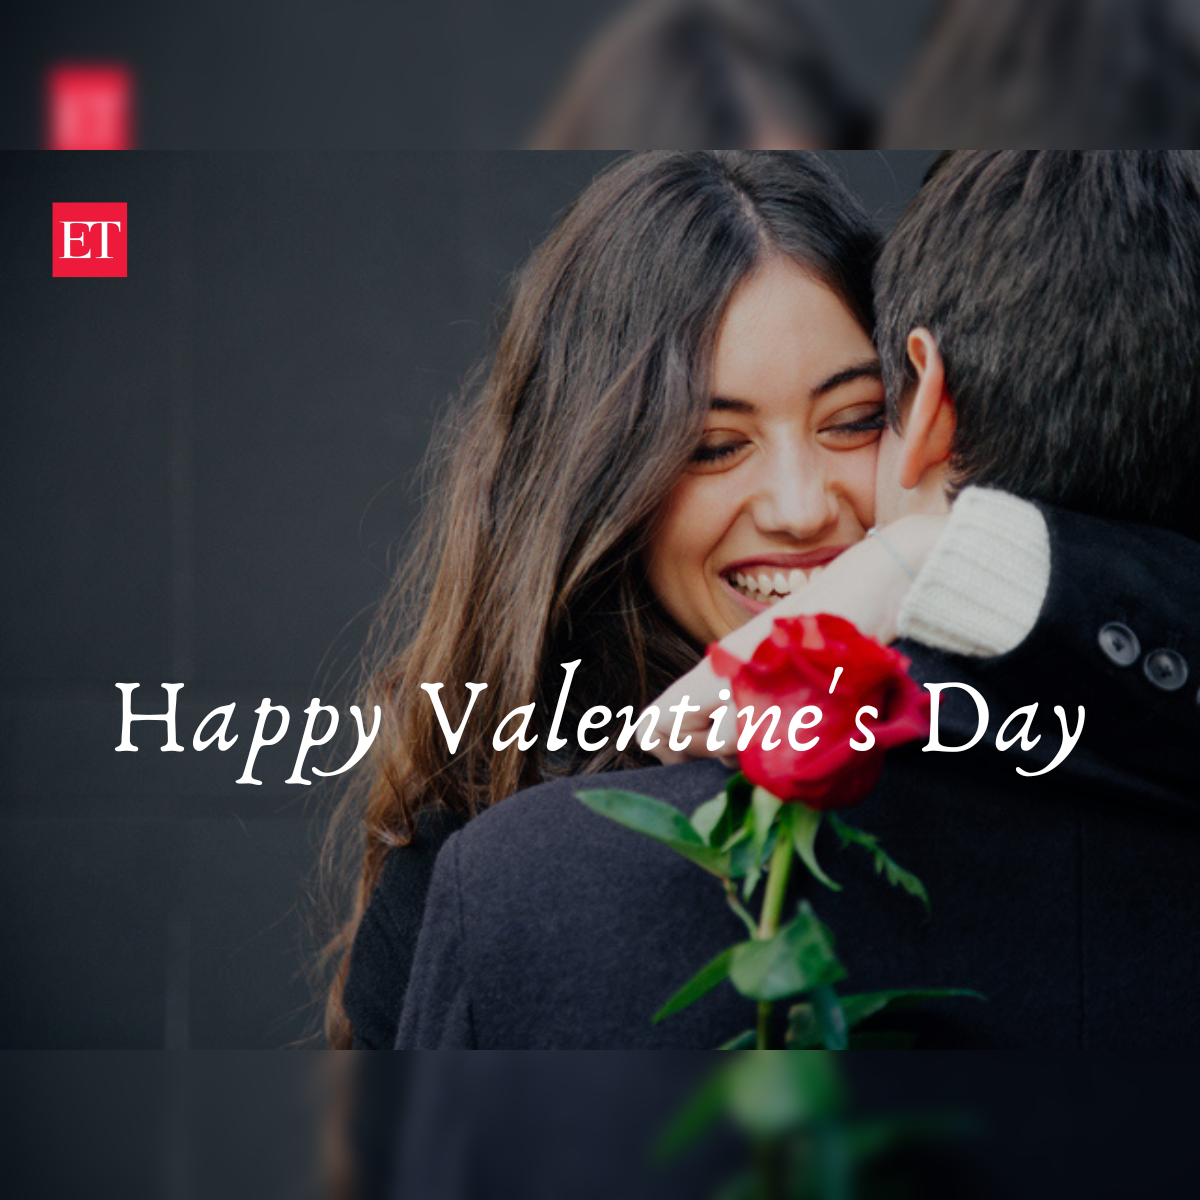 Happy Valentine Day Wishes - Apps on Google Play